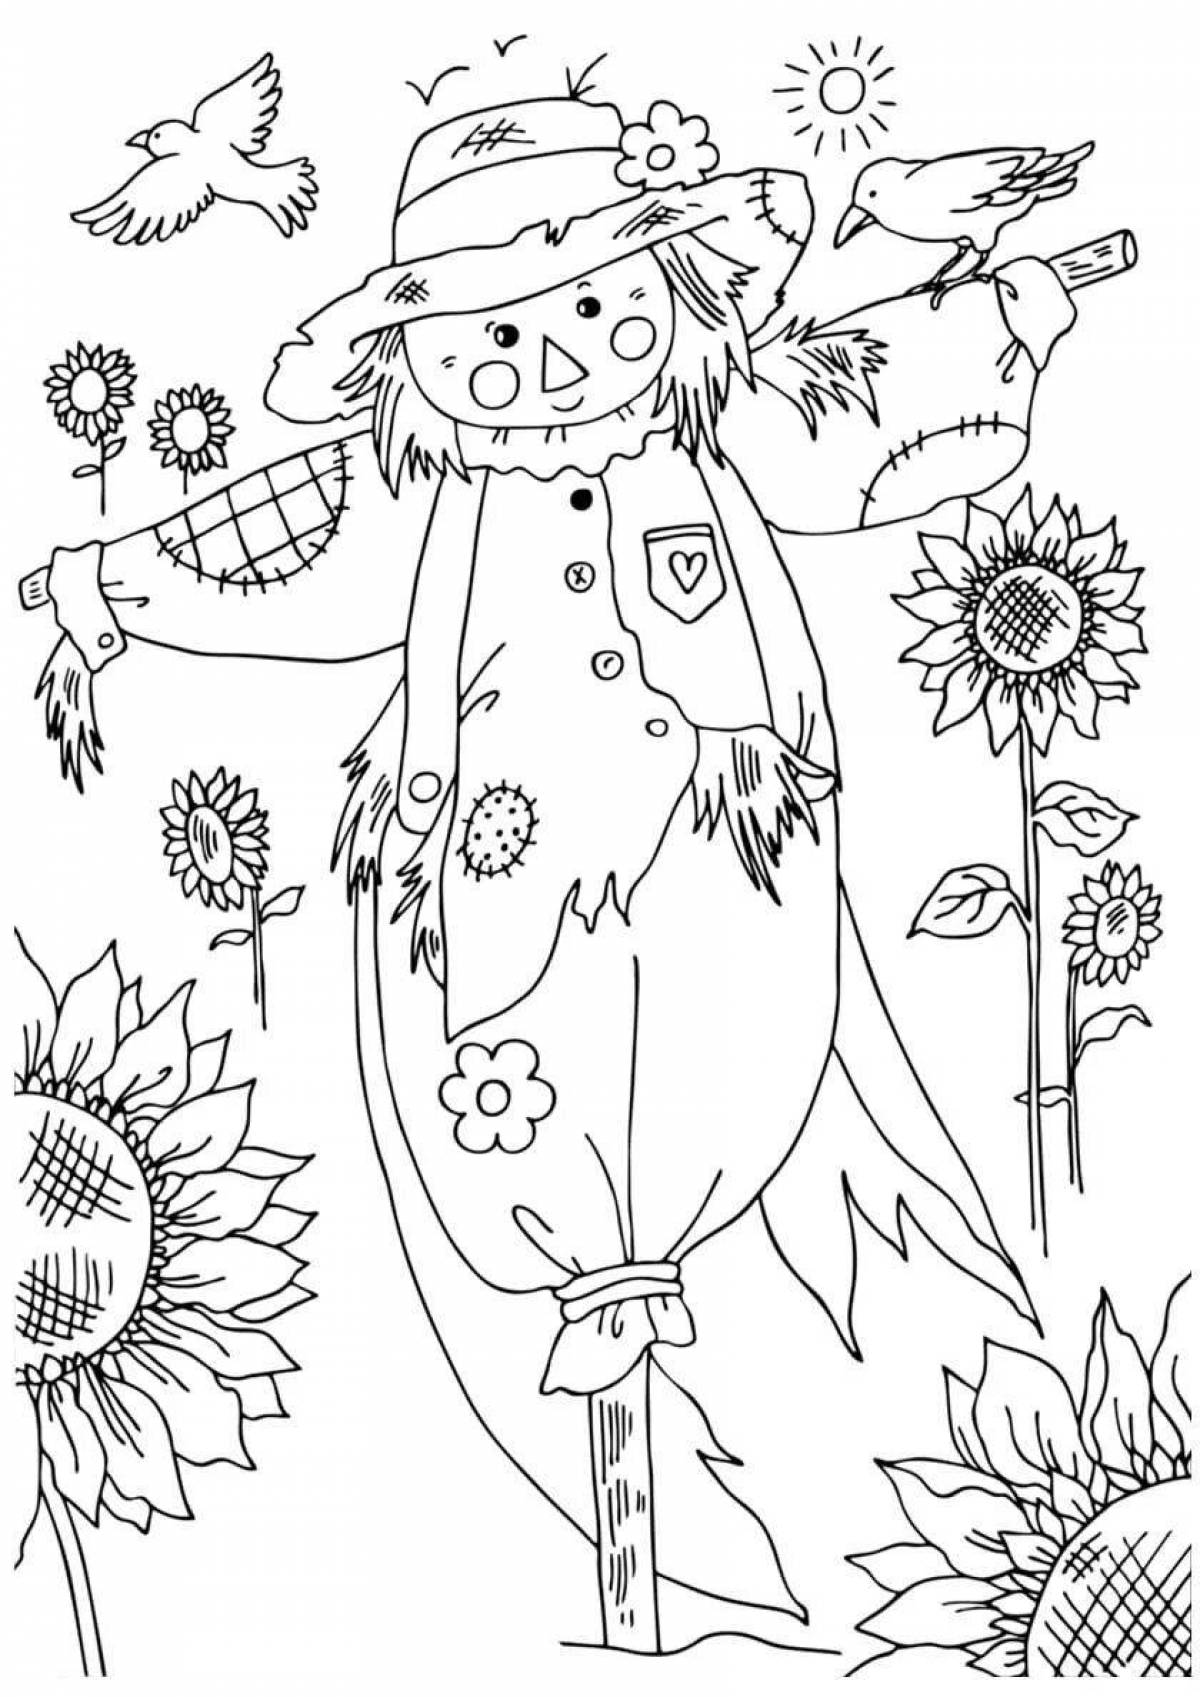 Amazing scarecrow coloring page